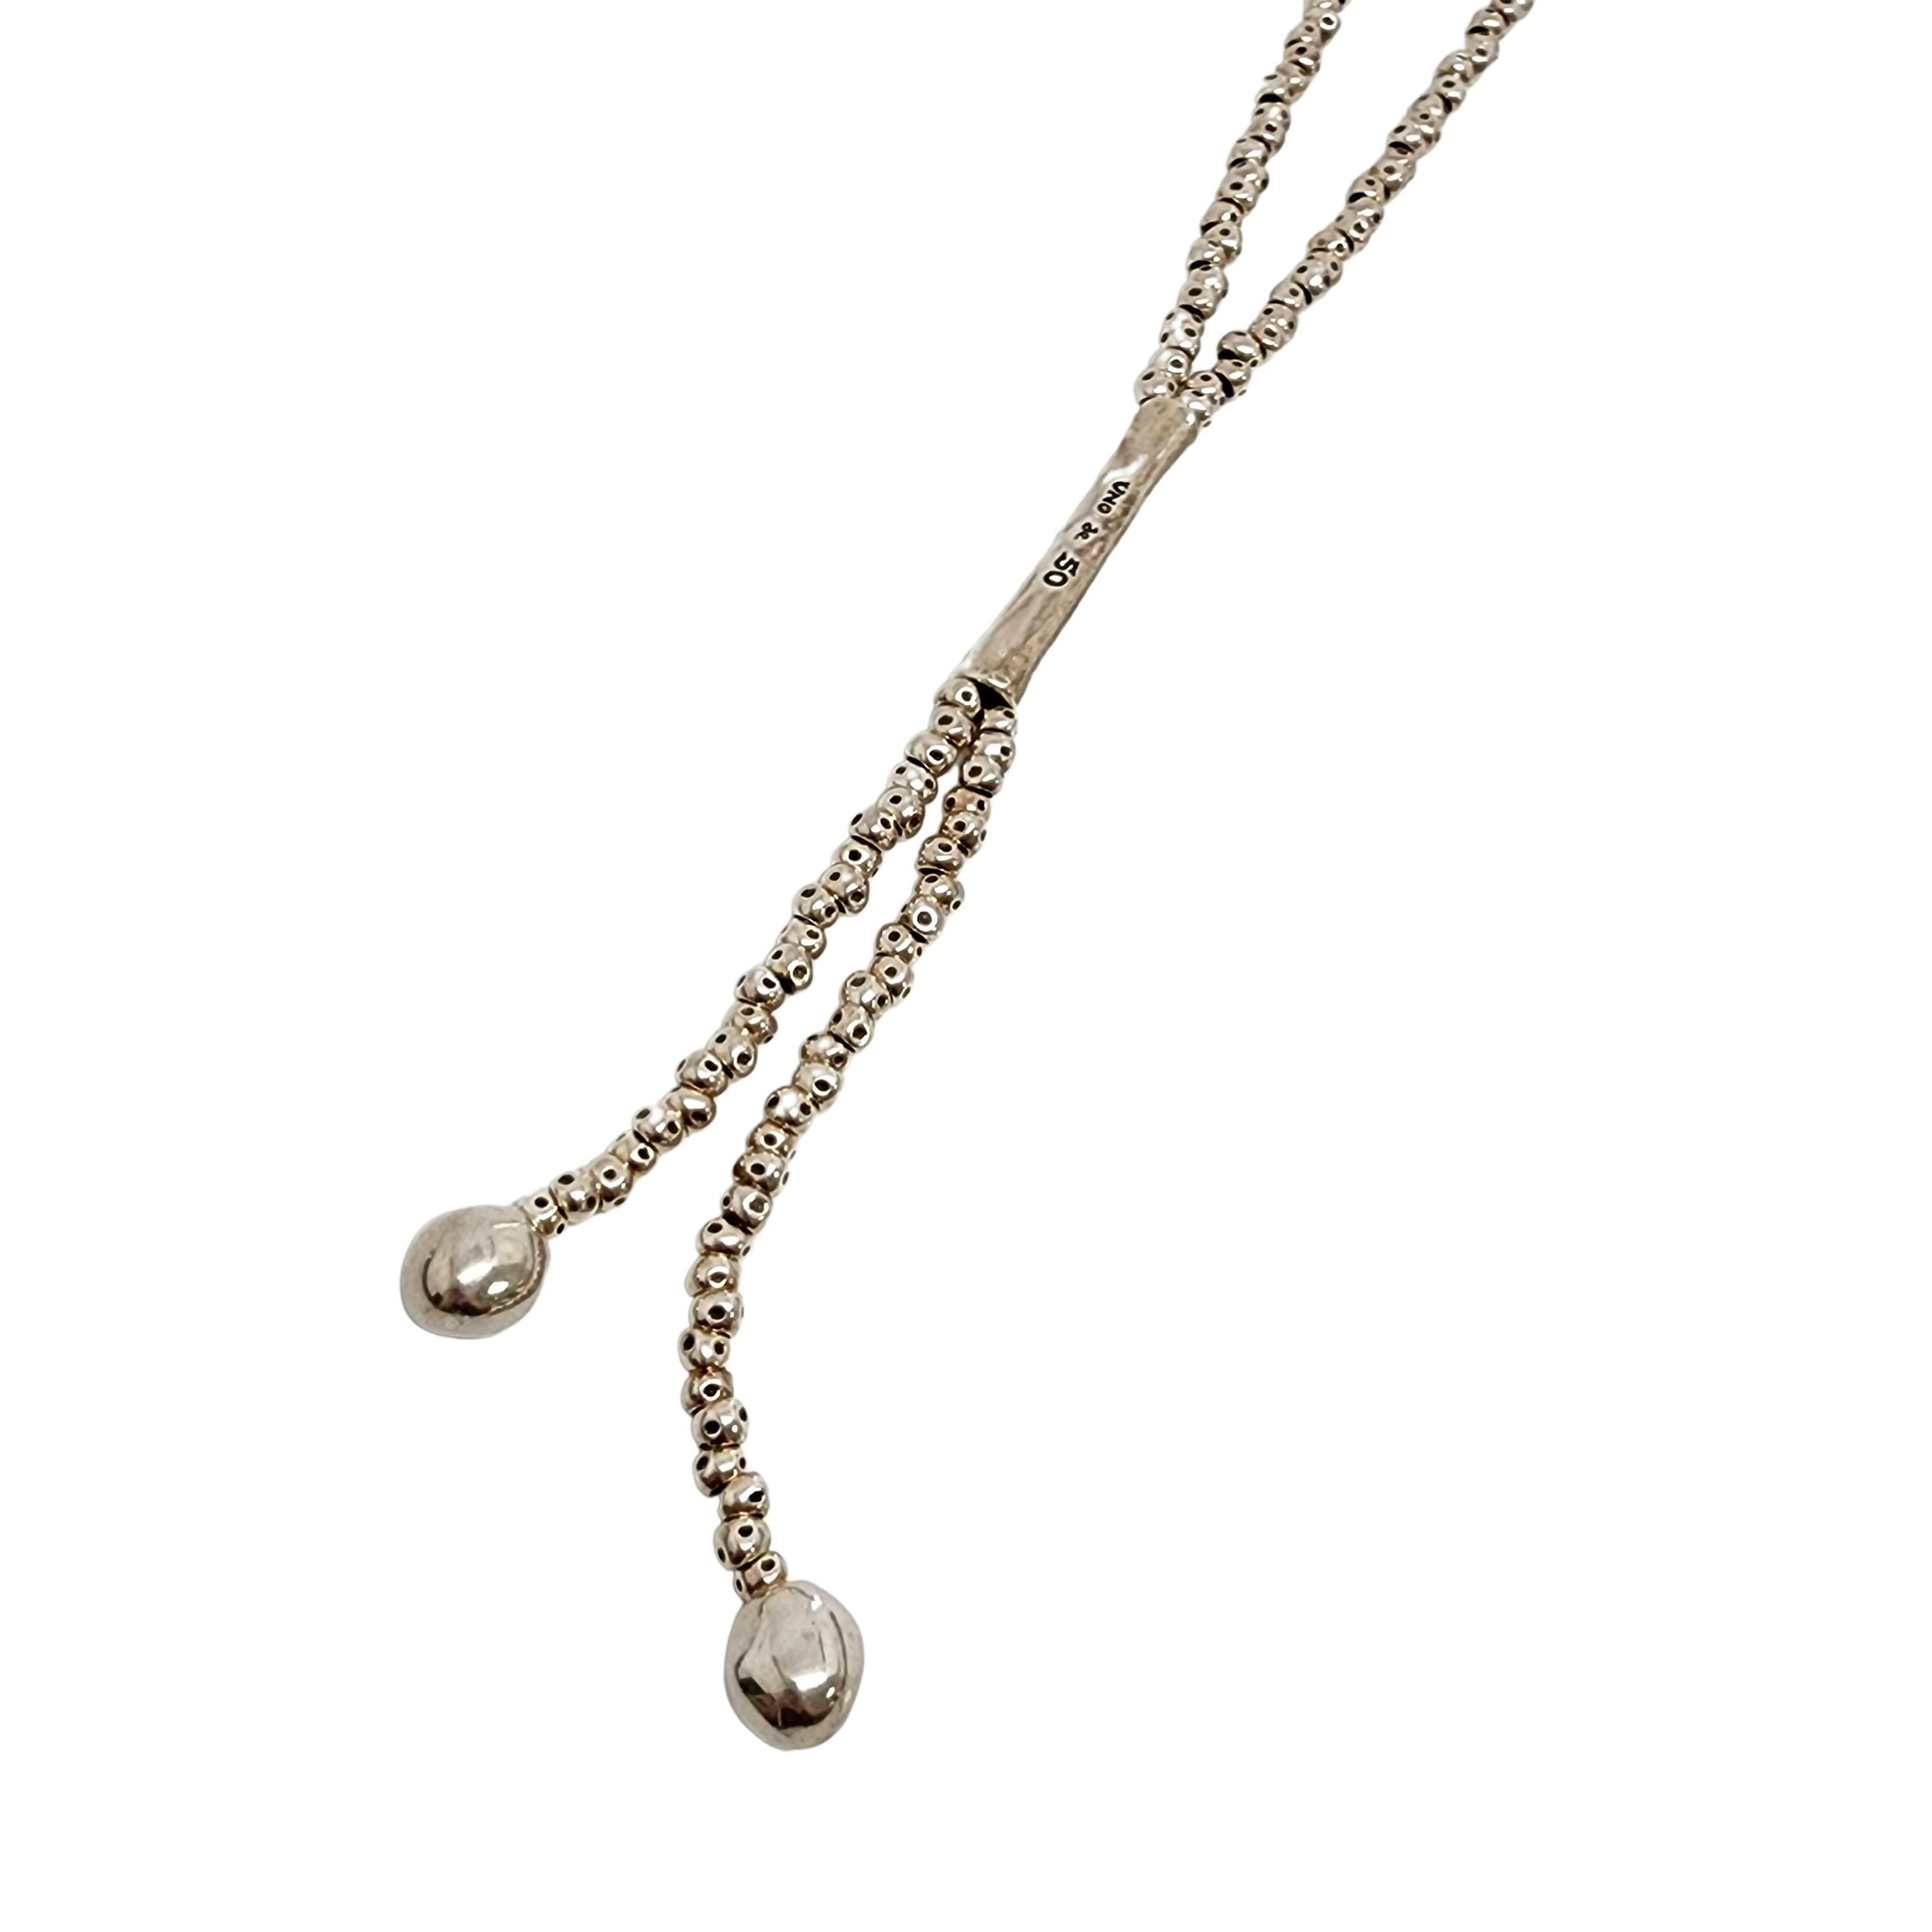 Women's Uno de 50 All Balls Silver Plated Necklace #12790 For Sale